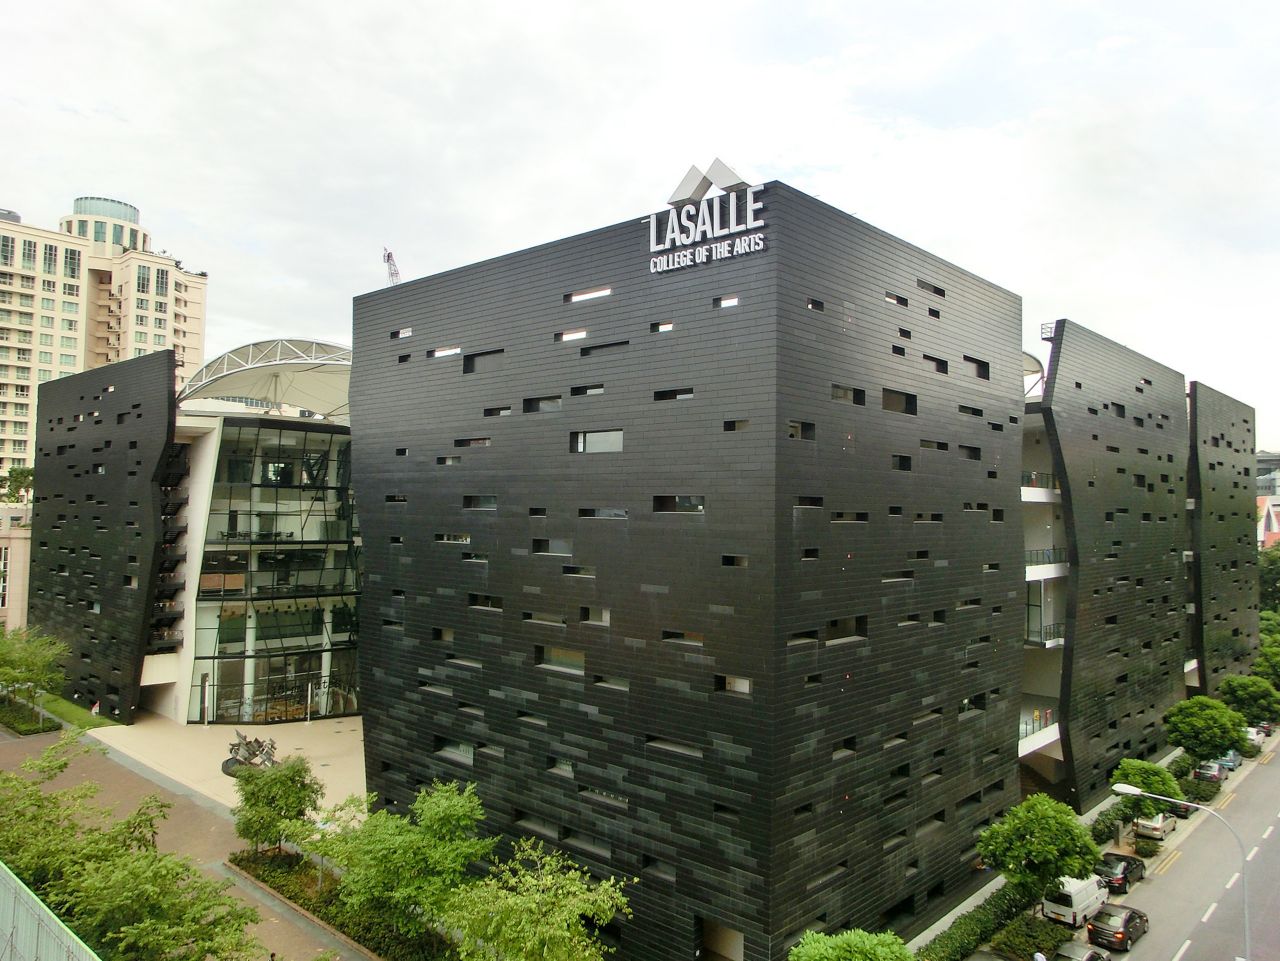 Building with black facade panels